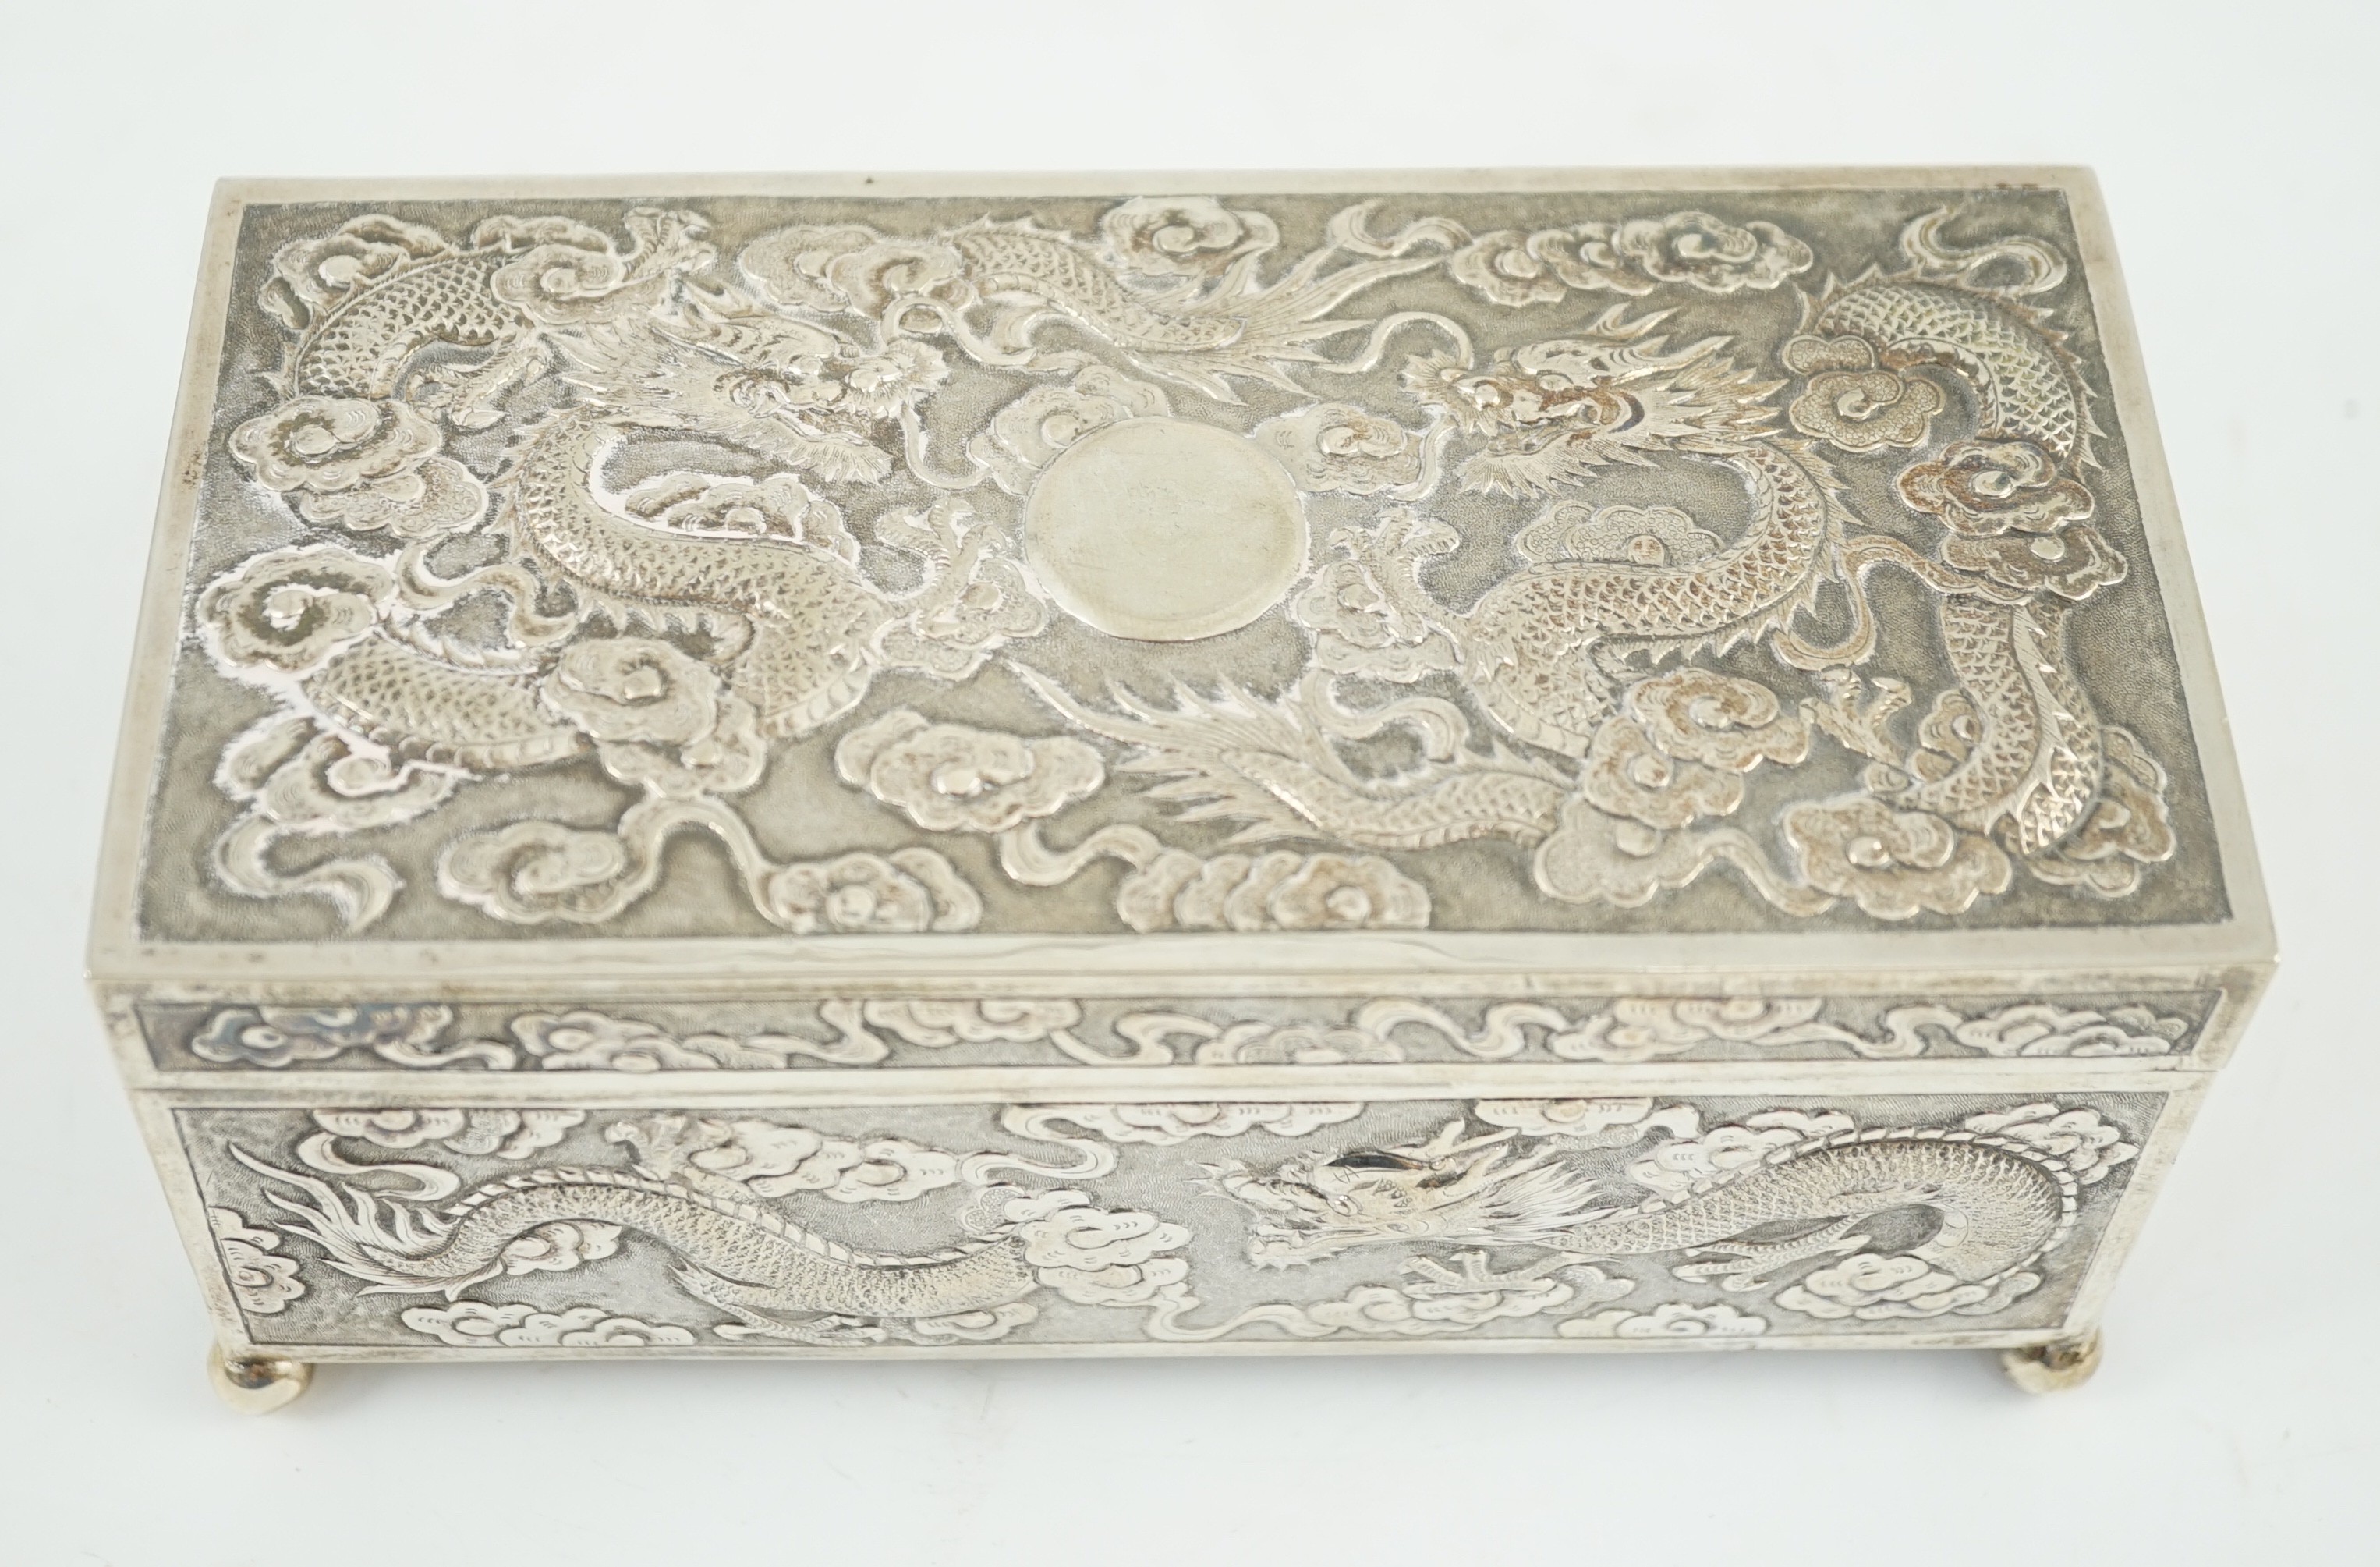 A late 19th/early 20th century Chinese Export silver rectangular cigarette box, by WA